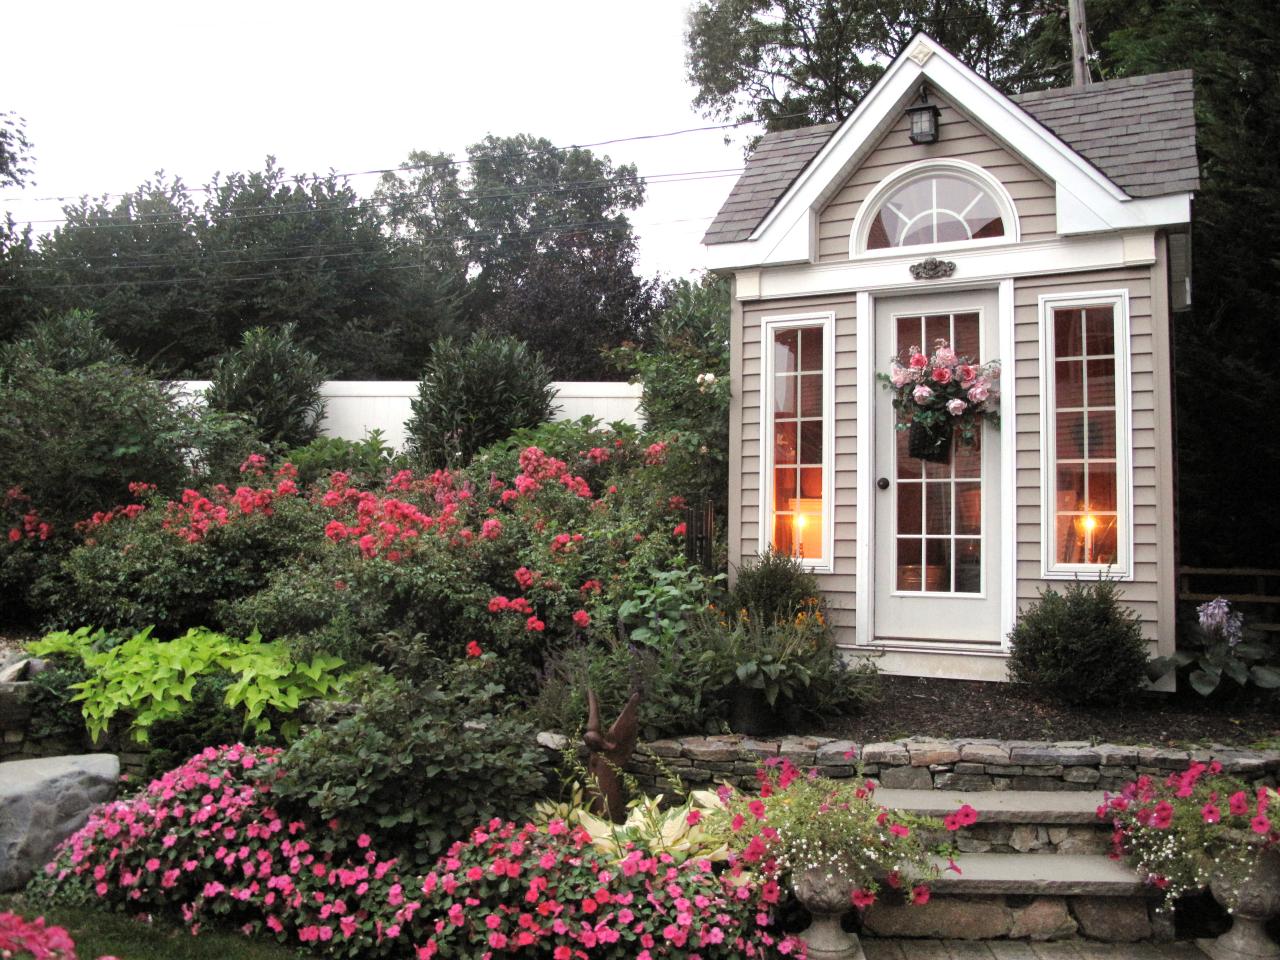 Garden Sheds: They've Never Looked So Good | Landscaping Ideas and 